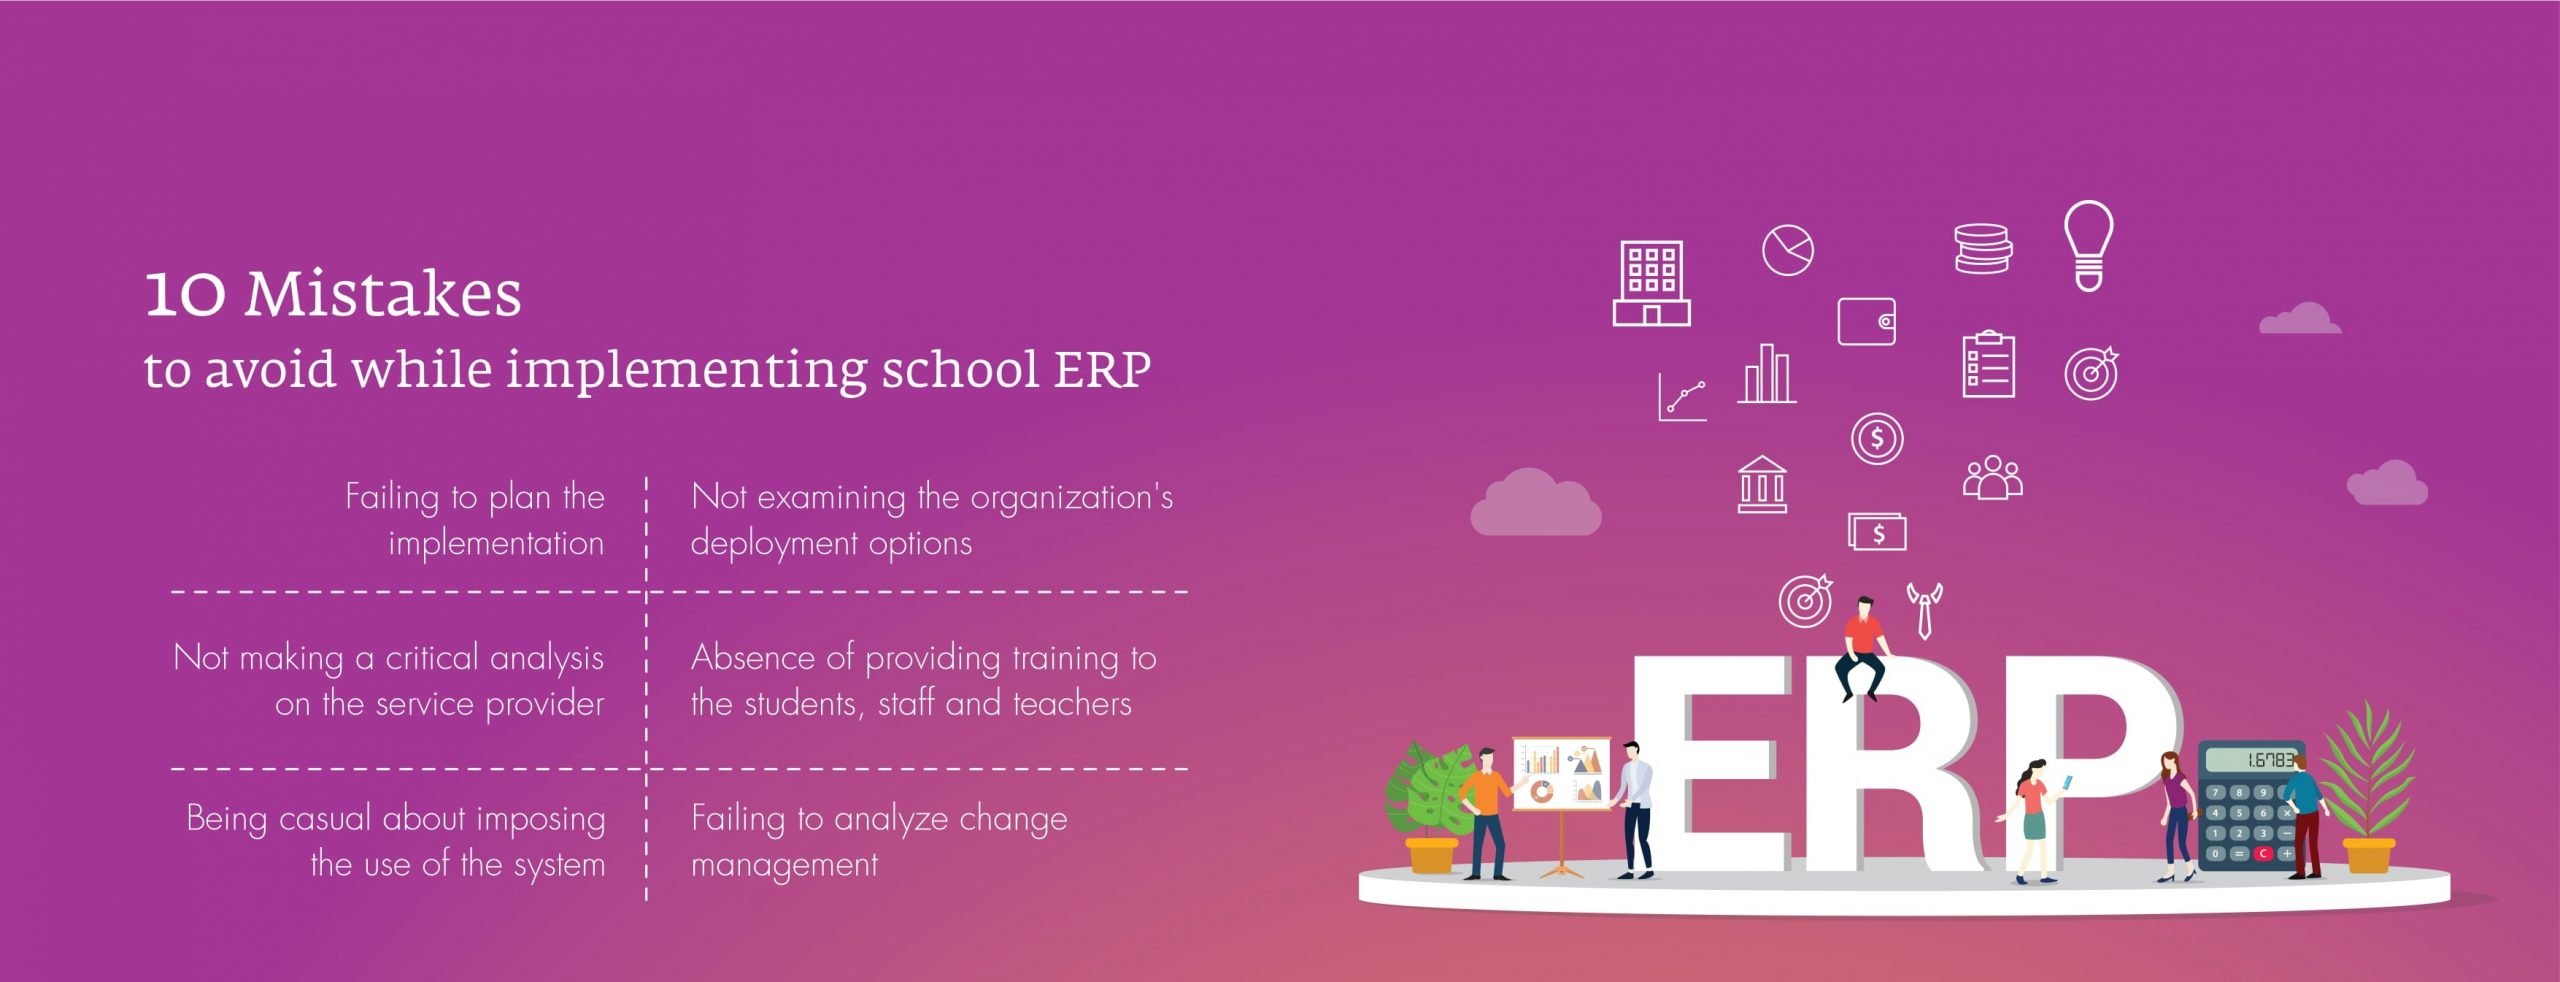 10 Mistakes To Avoid While Implementing School ERP